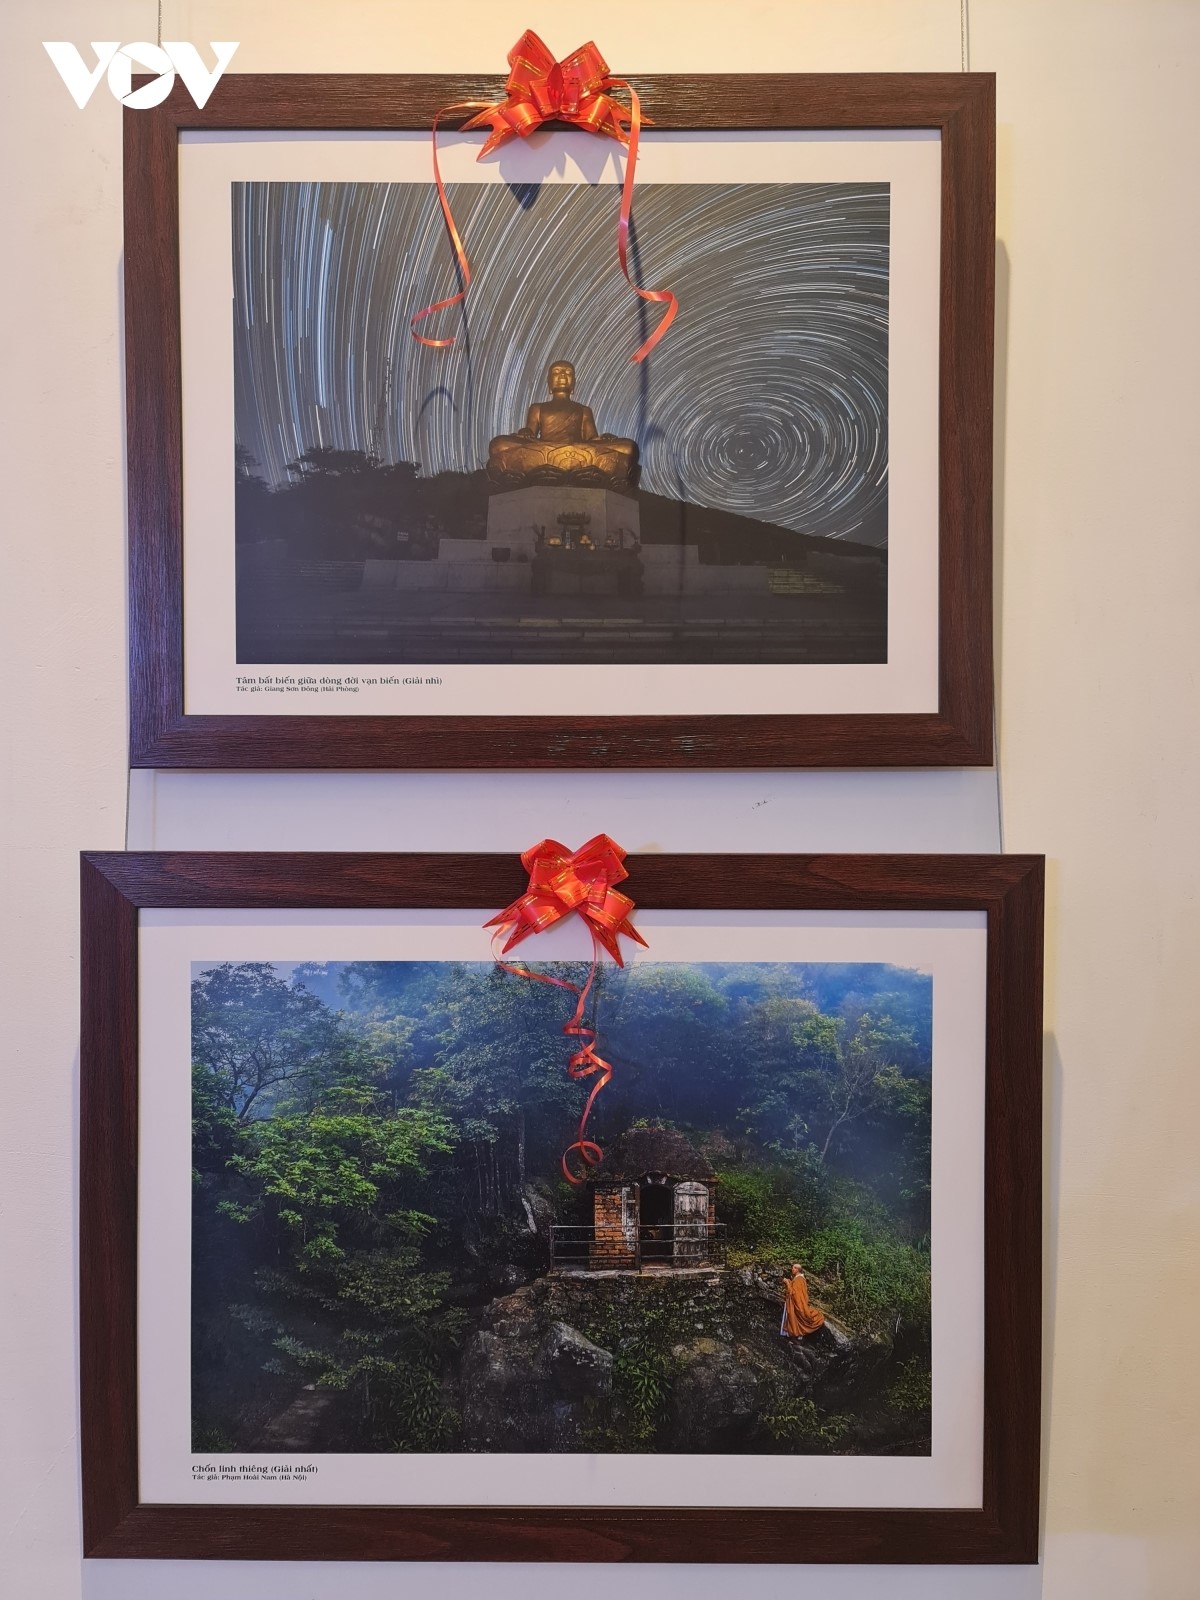 by putting on the exhibition the vietnamese buddhist sangha hope that the photos can serve to promote images of various sightseeing spots, historical relic sites, and the culture of the vietnamese buddhism to both domestic and international tourists.